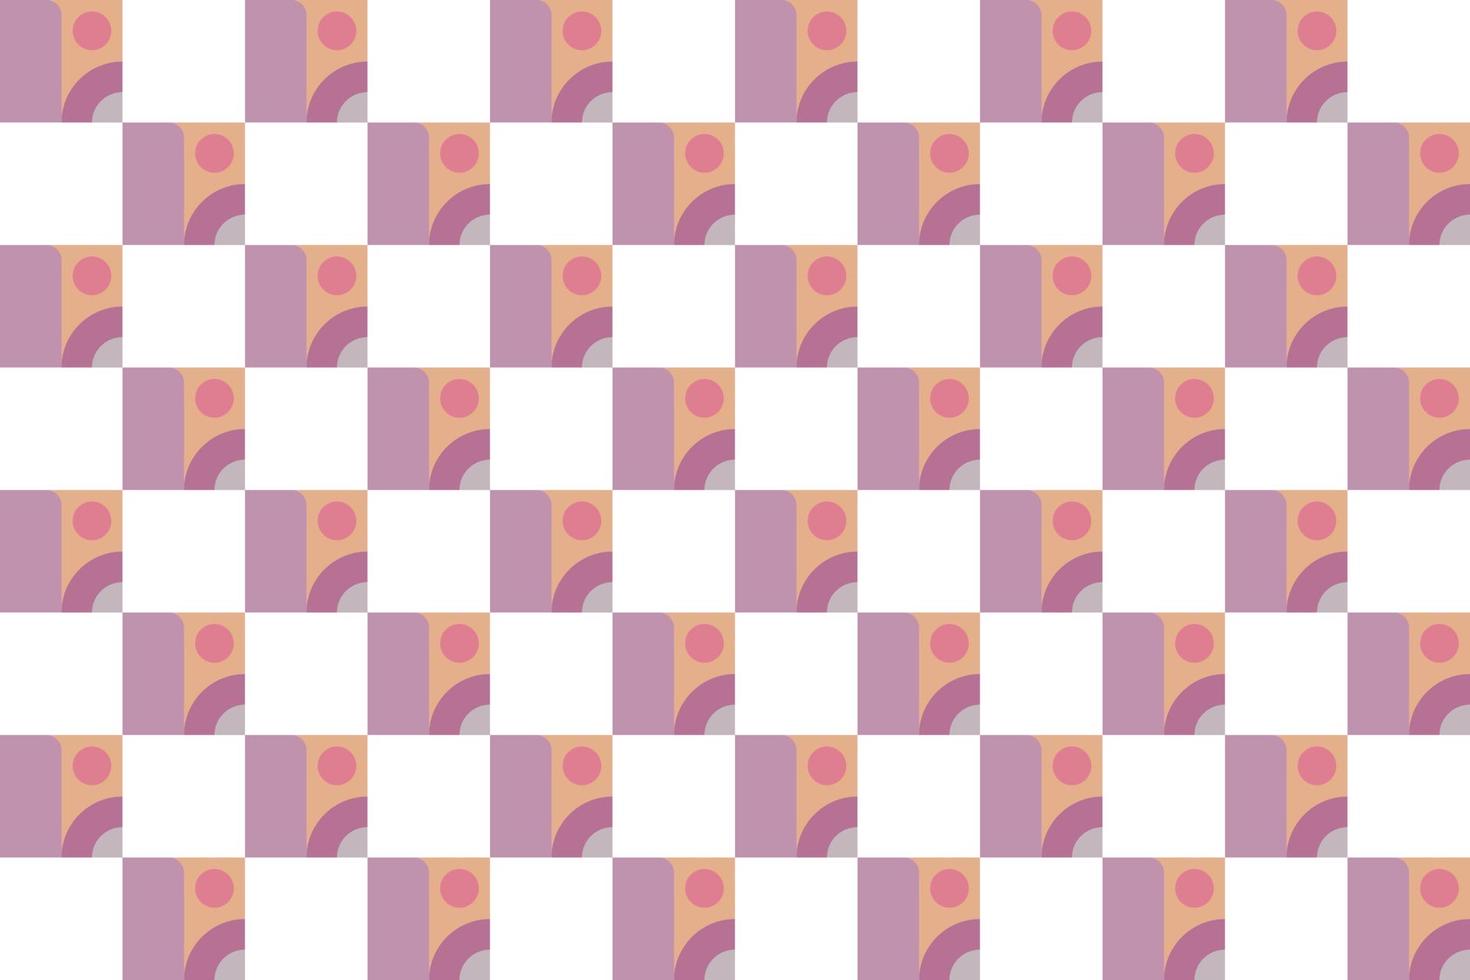 Checkered Pattern Vector Art is a pattern of modified stripes consisting of crossed horizontal and vertical lines which form squares.